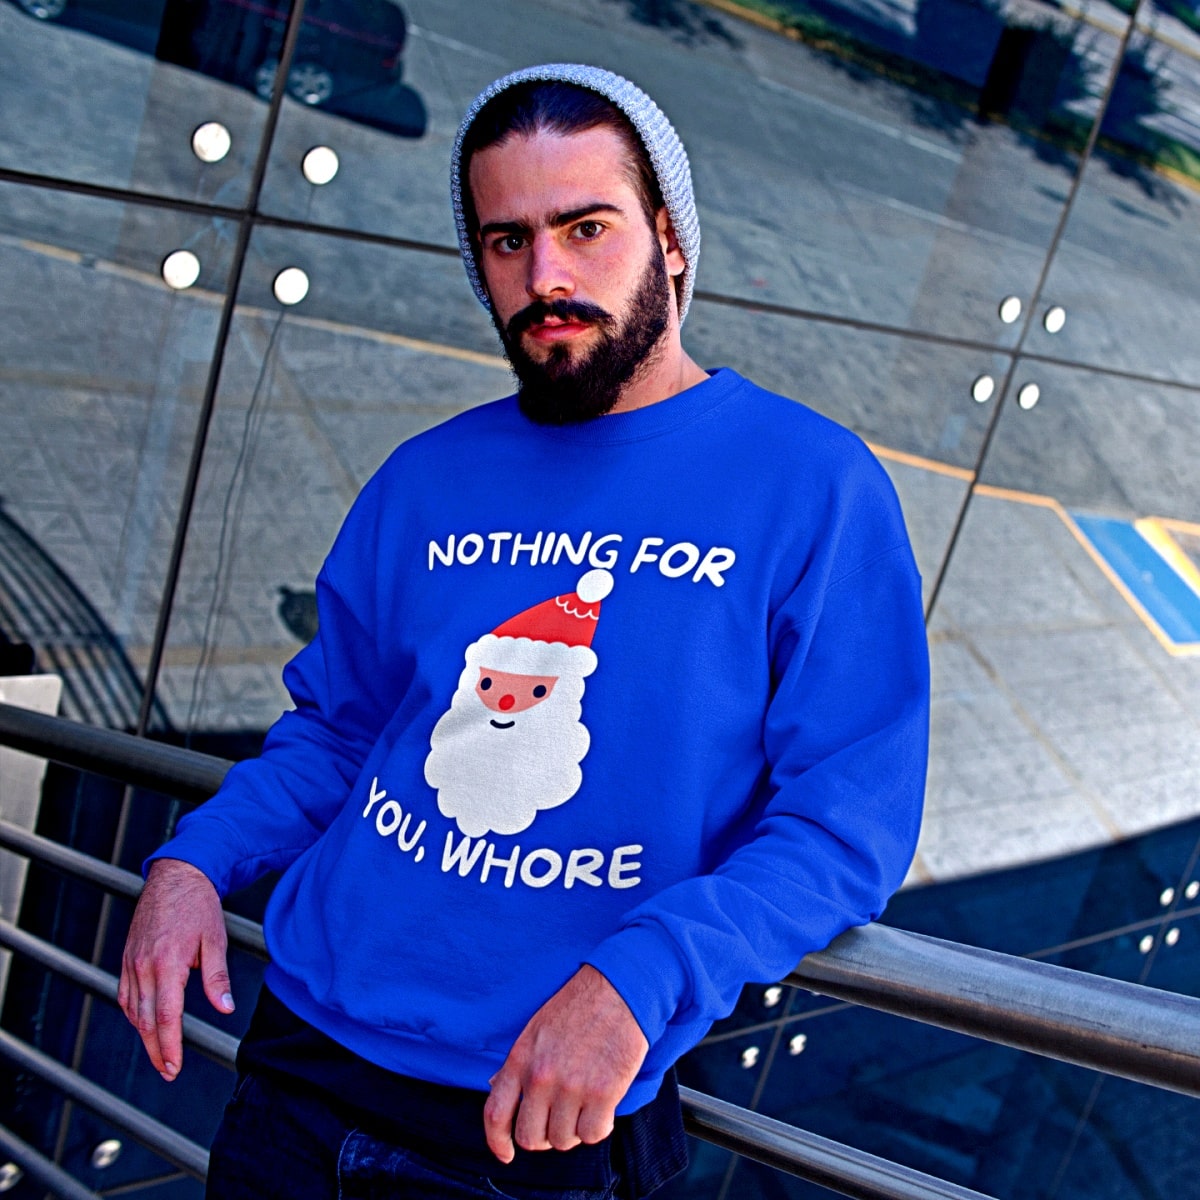 Funny Christmas Sweater, blue, That Reads "nothing for you, whore" With A Santa Claus Image In The Center